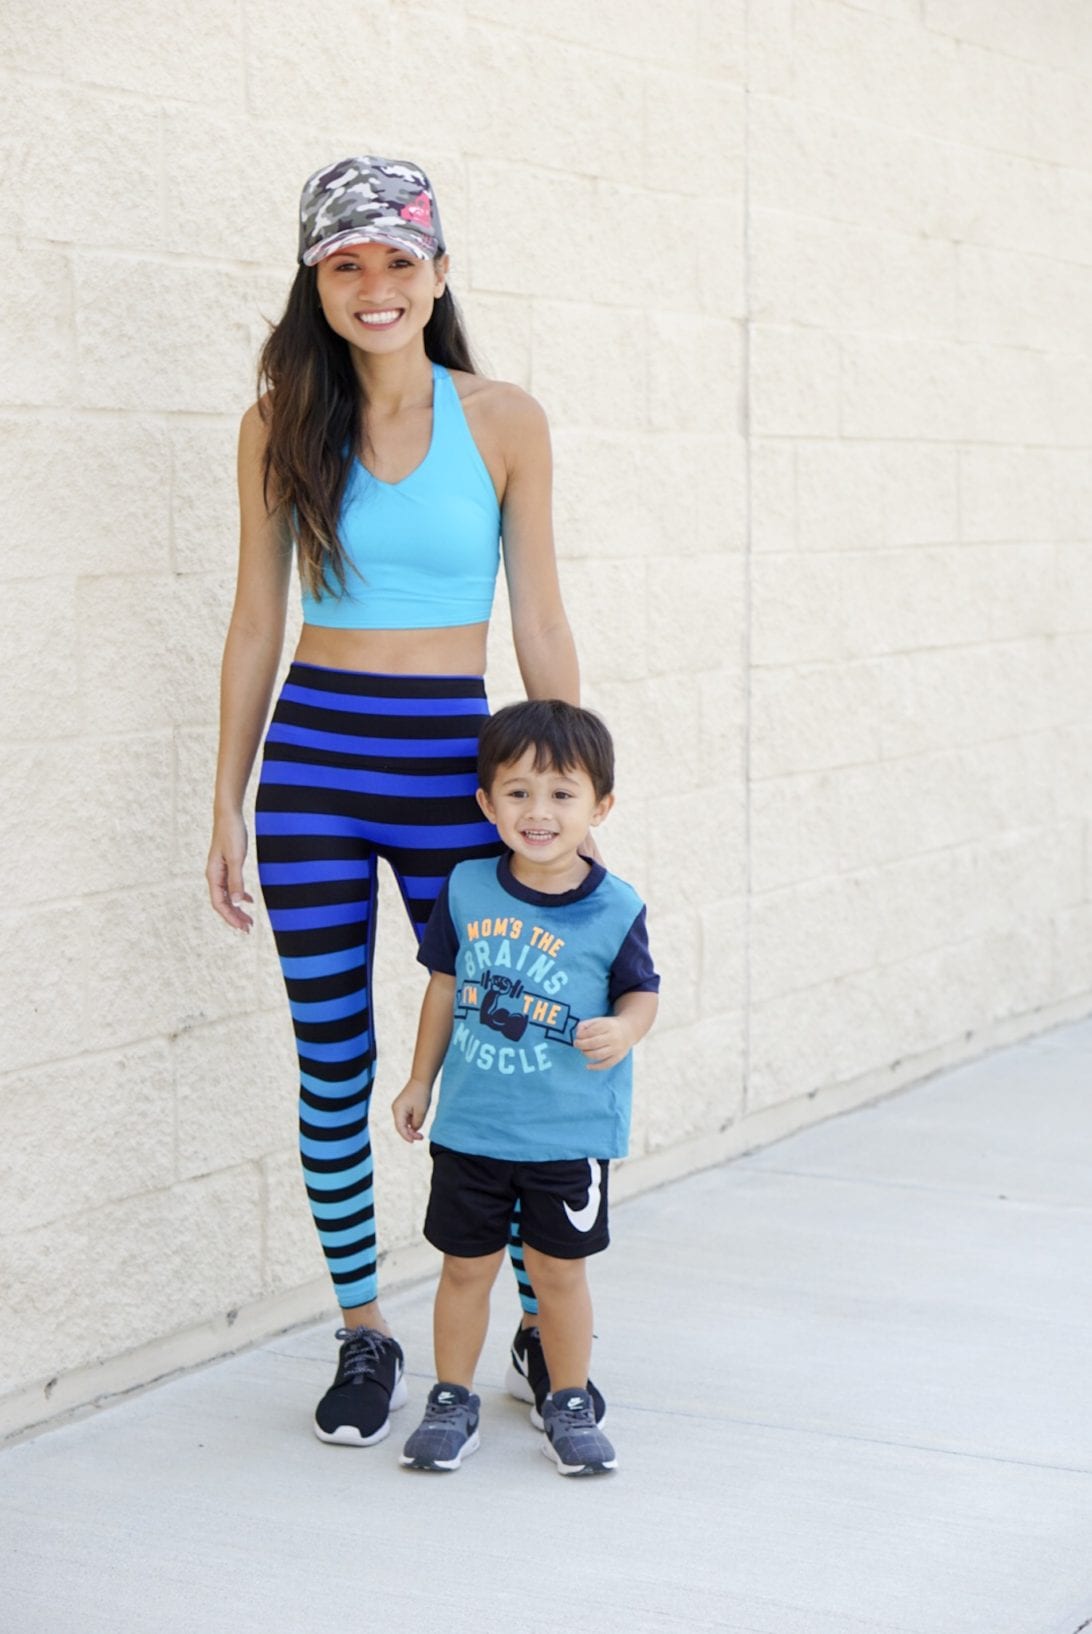 cardio routine, working out with your toddler, workout outfit, exercise outfit, mommy and me workout, k-deer leggings, fitness gear, fitness style, fitness fashion, mommy and me style, mommy and son style 